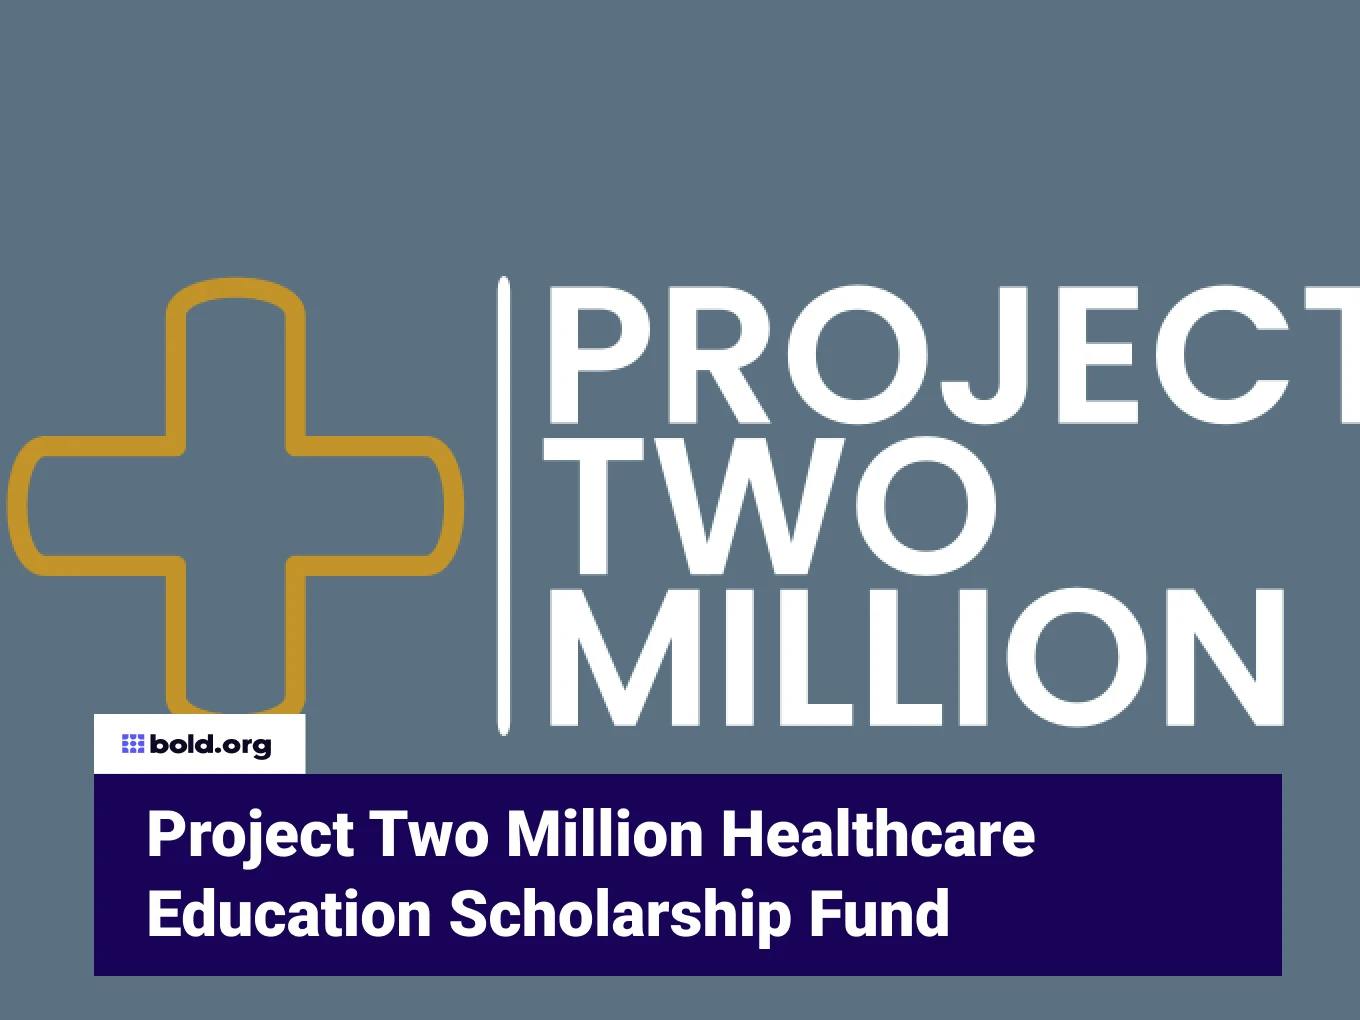 Project Two Million Healthcare Education Scholarship Fund